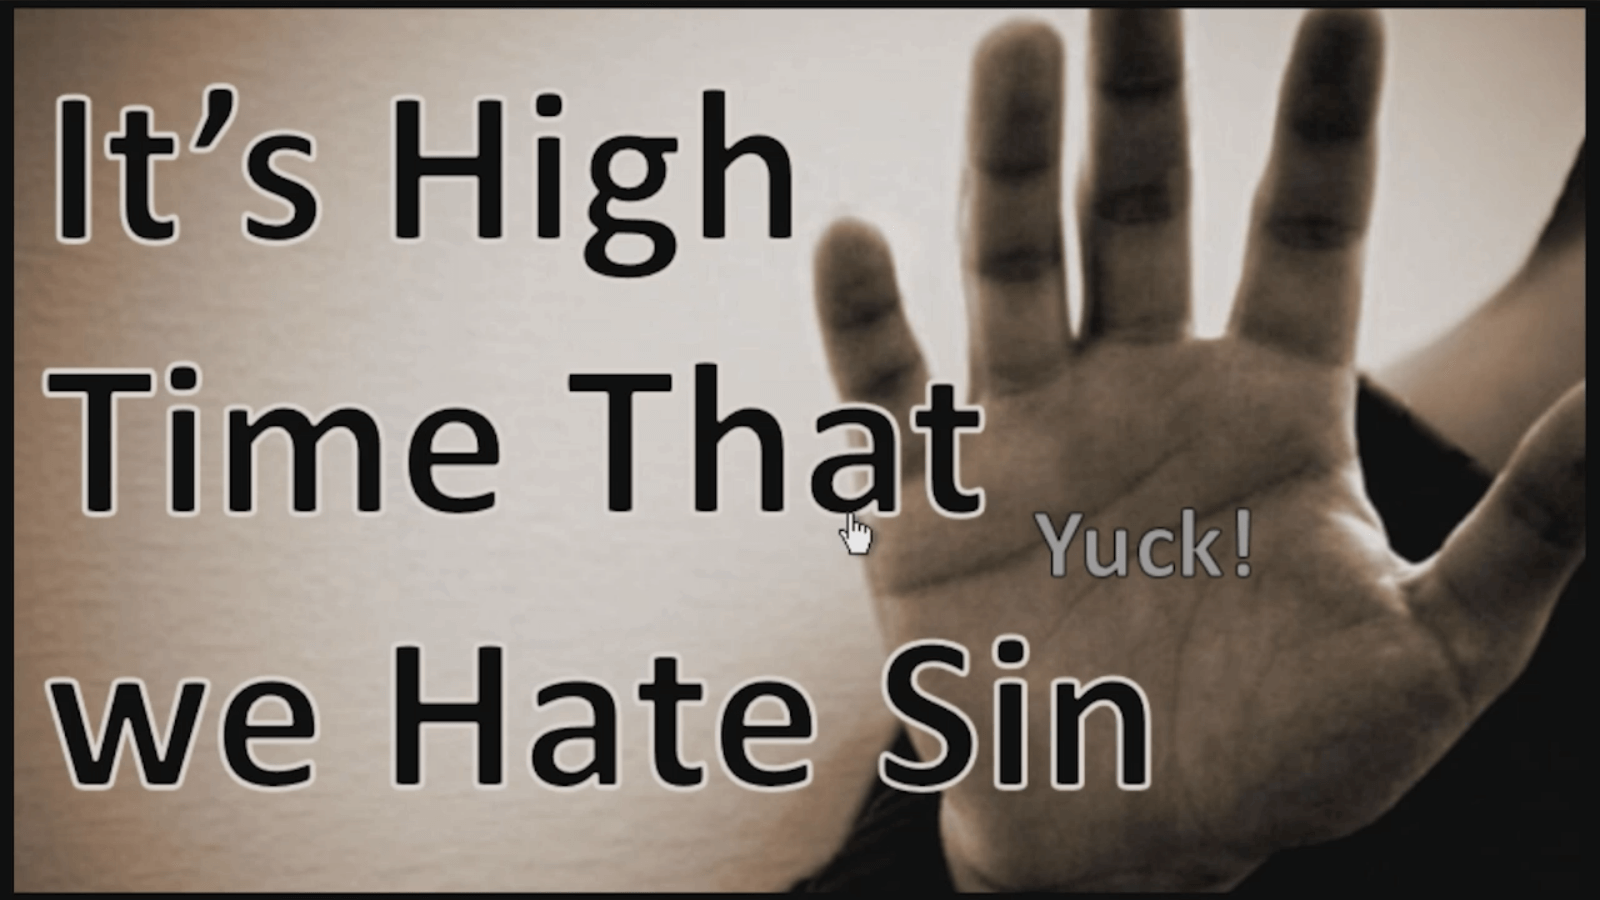 It’s High Time that we Hate Sin